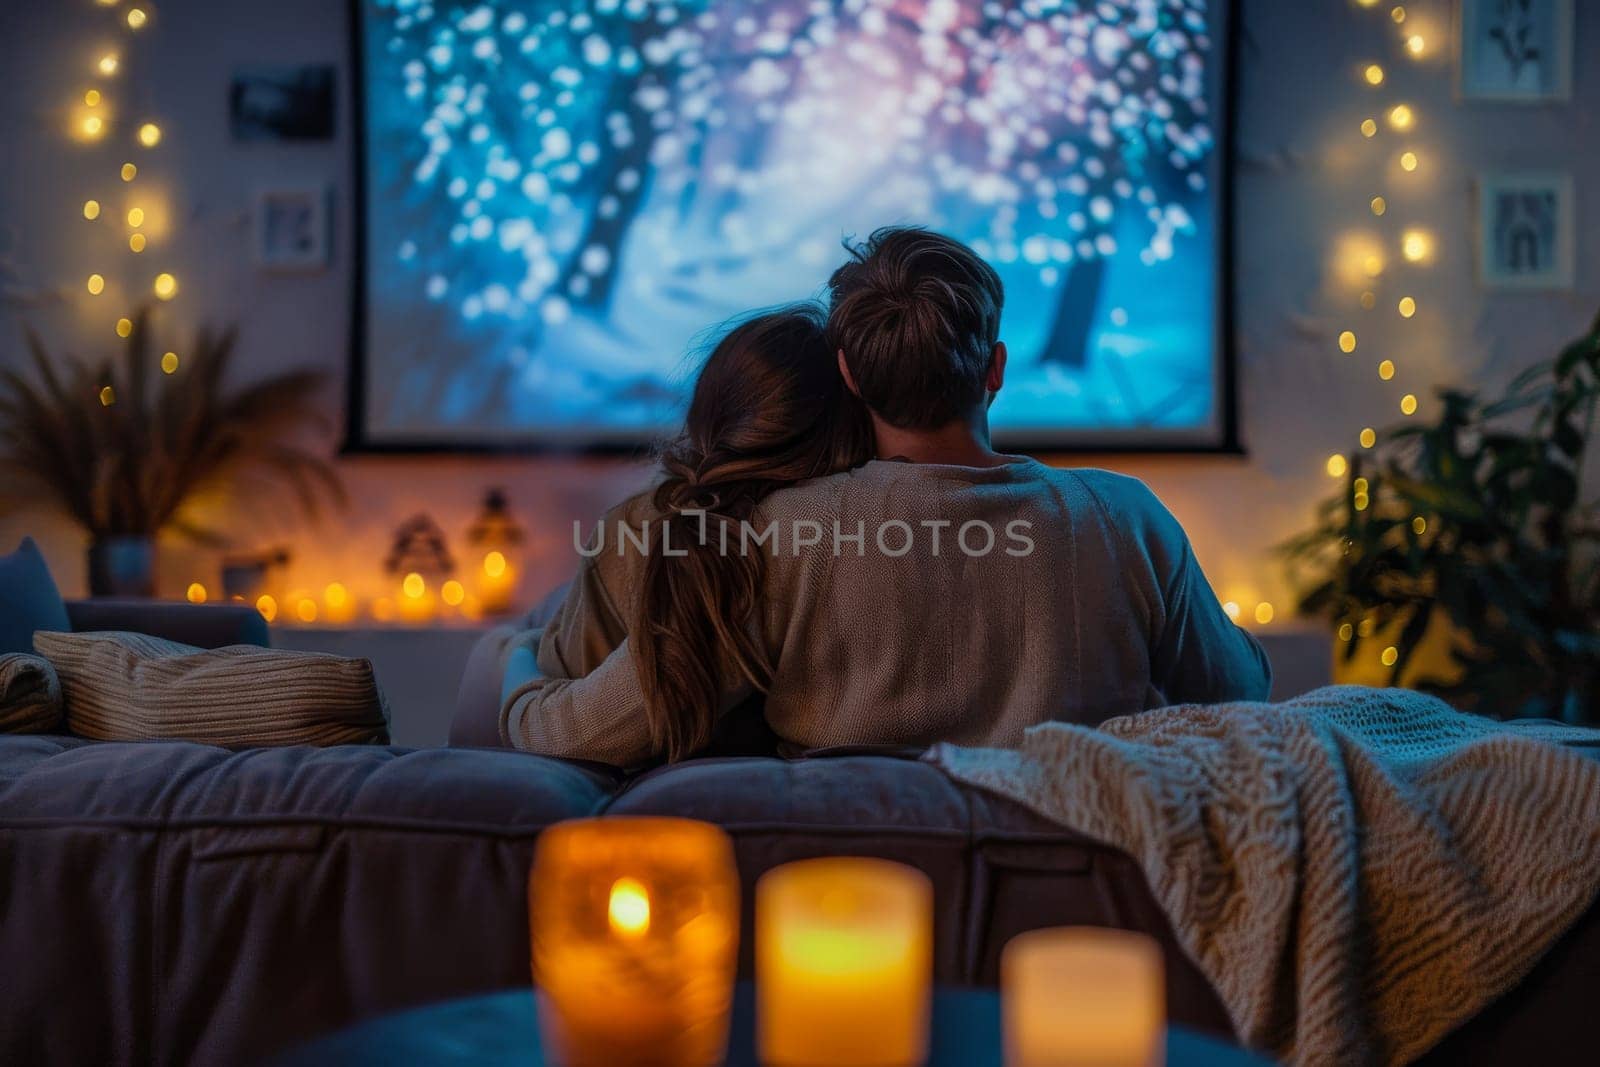 A couple is sitting on a couch in front of a television. The man is wearing a gray shirt and the woman is wearing a gray shirt. They are holding hands and watching a movie together